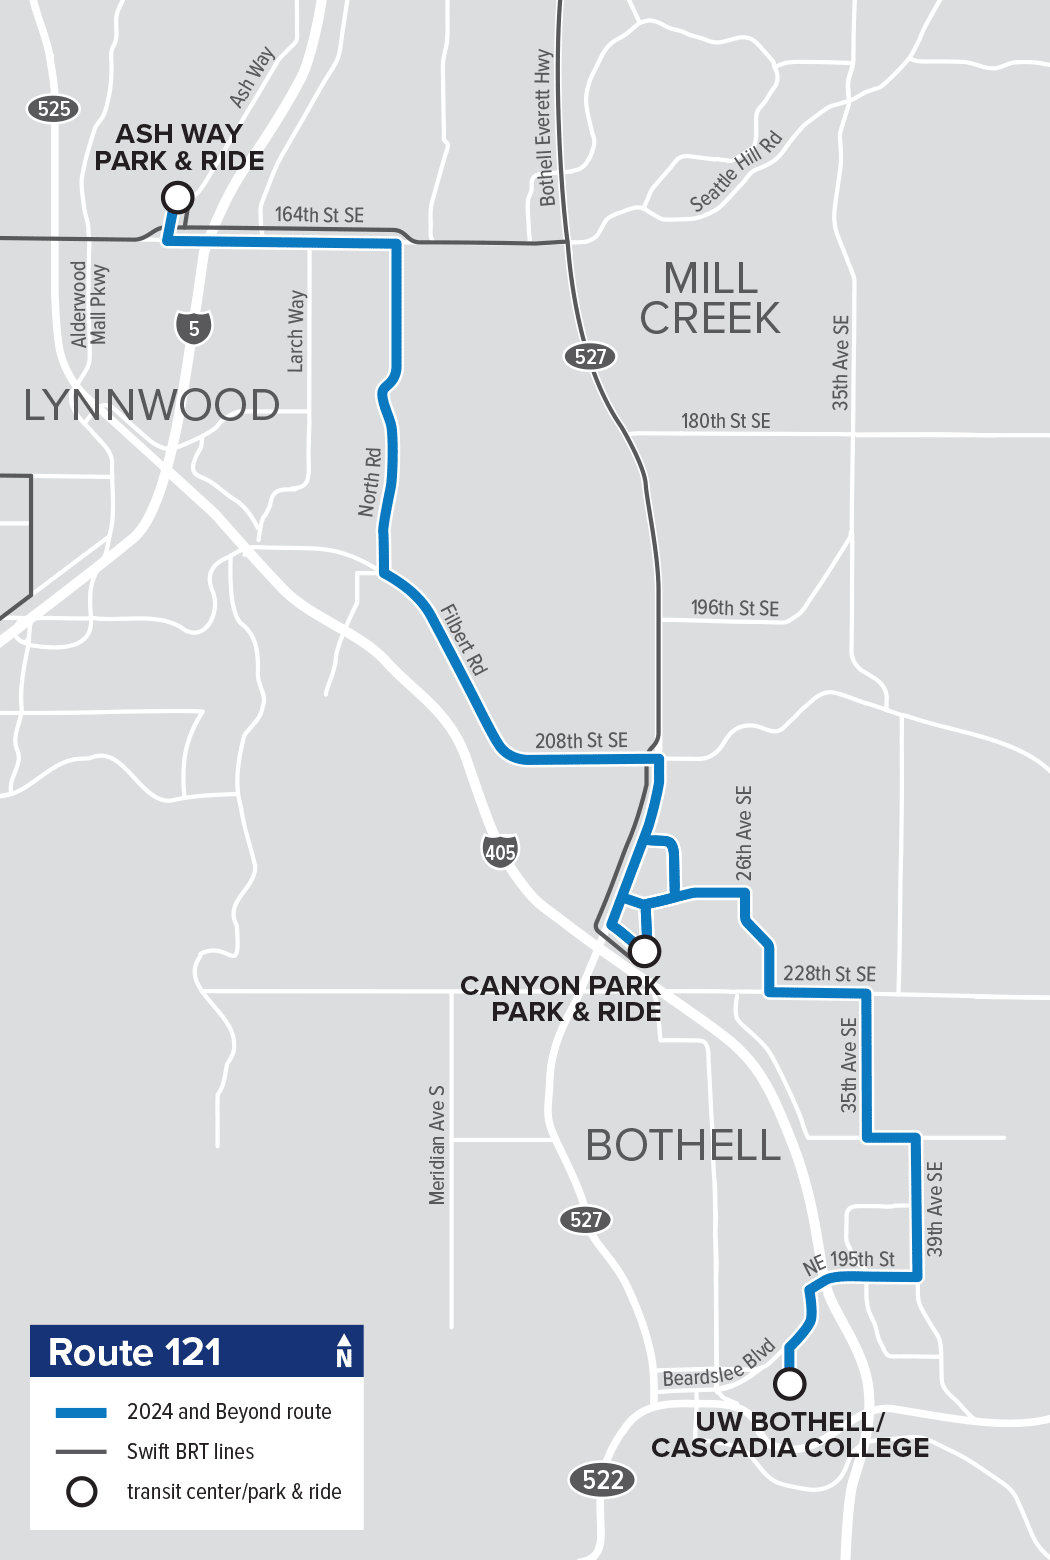 Route 121: Ash Way - Bothell (new route)